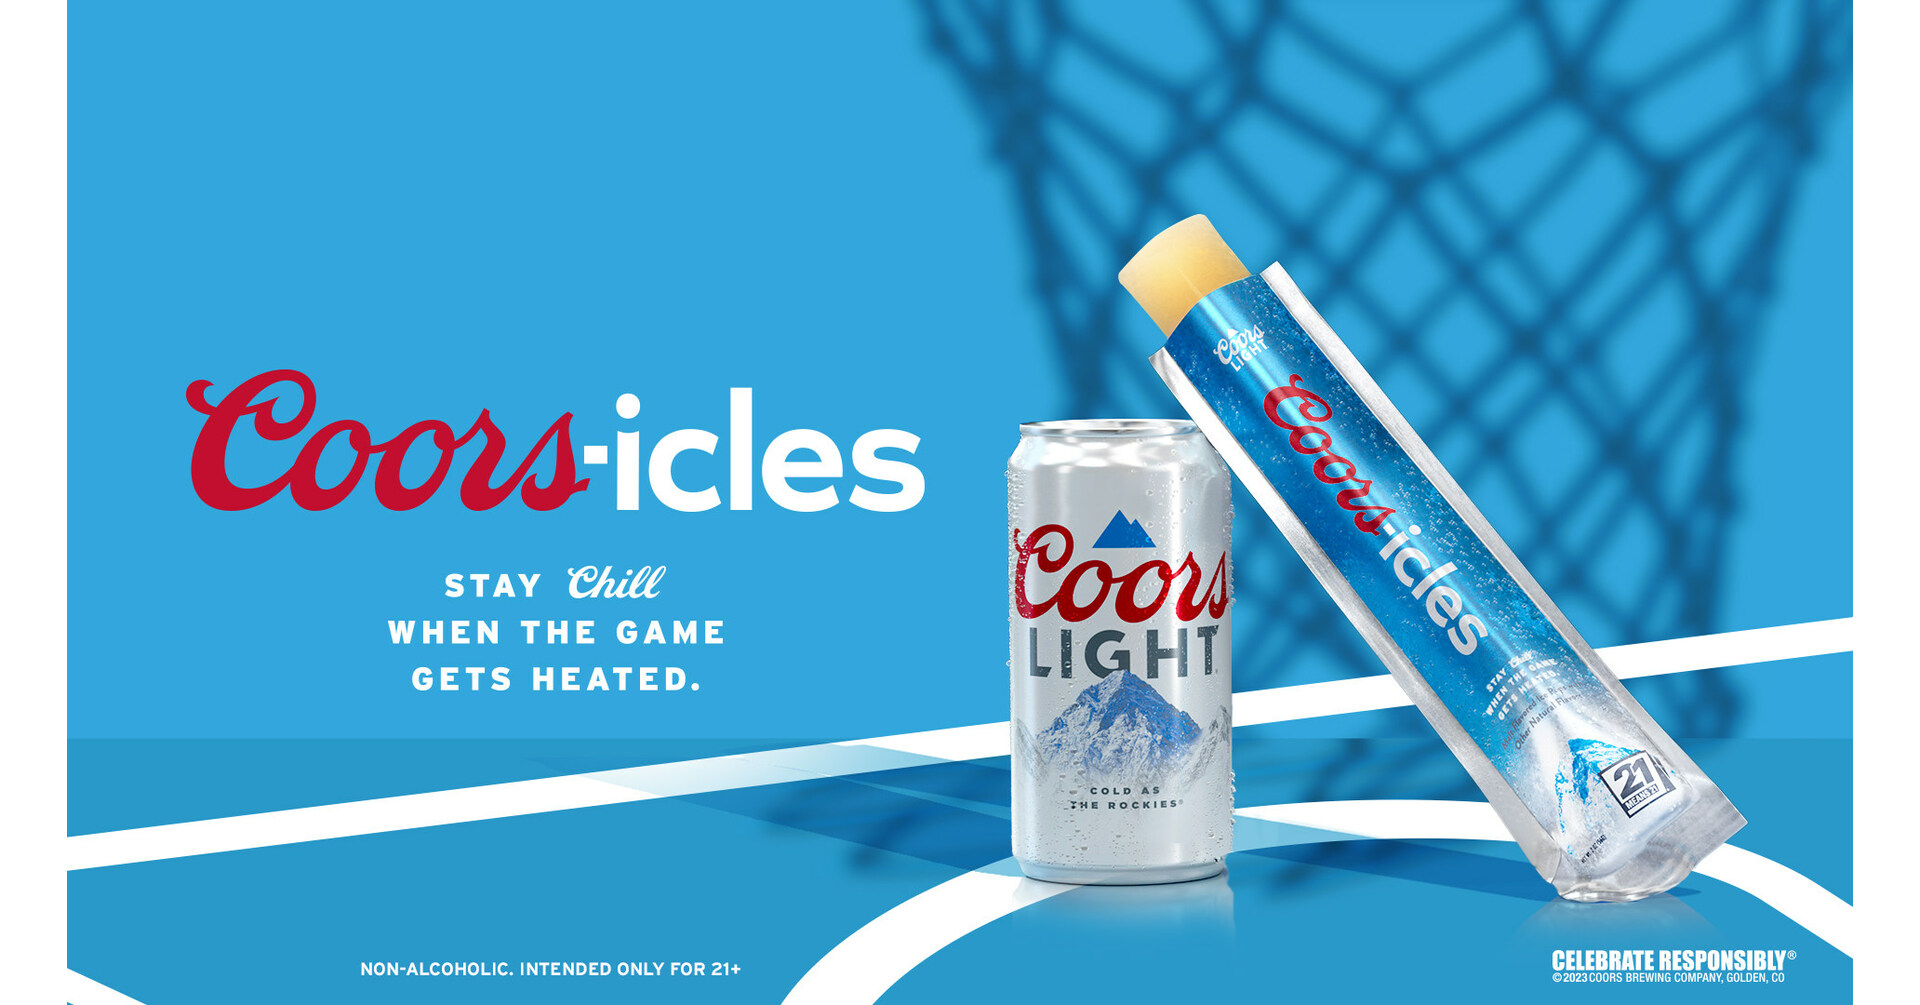 Beer Flavored Coors Icles